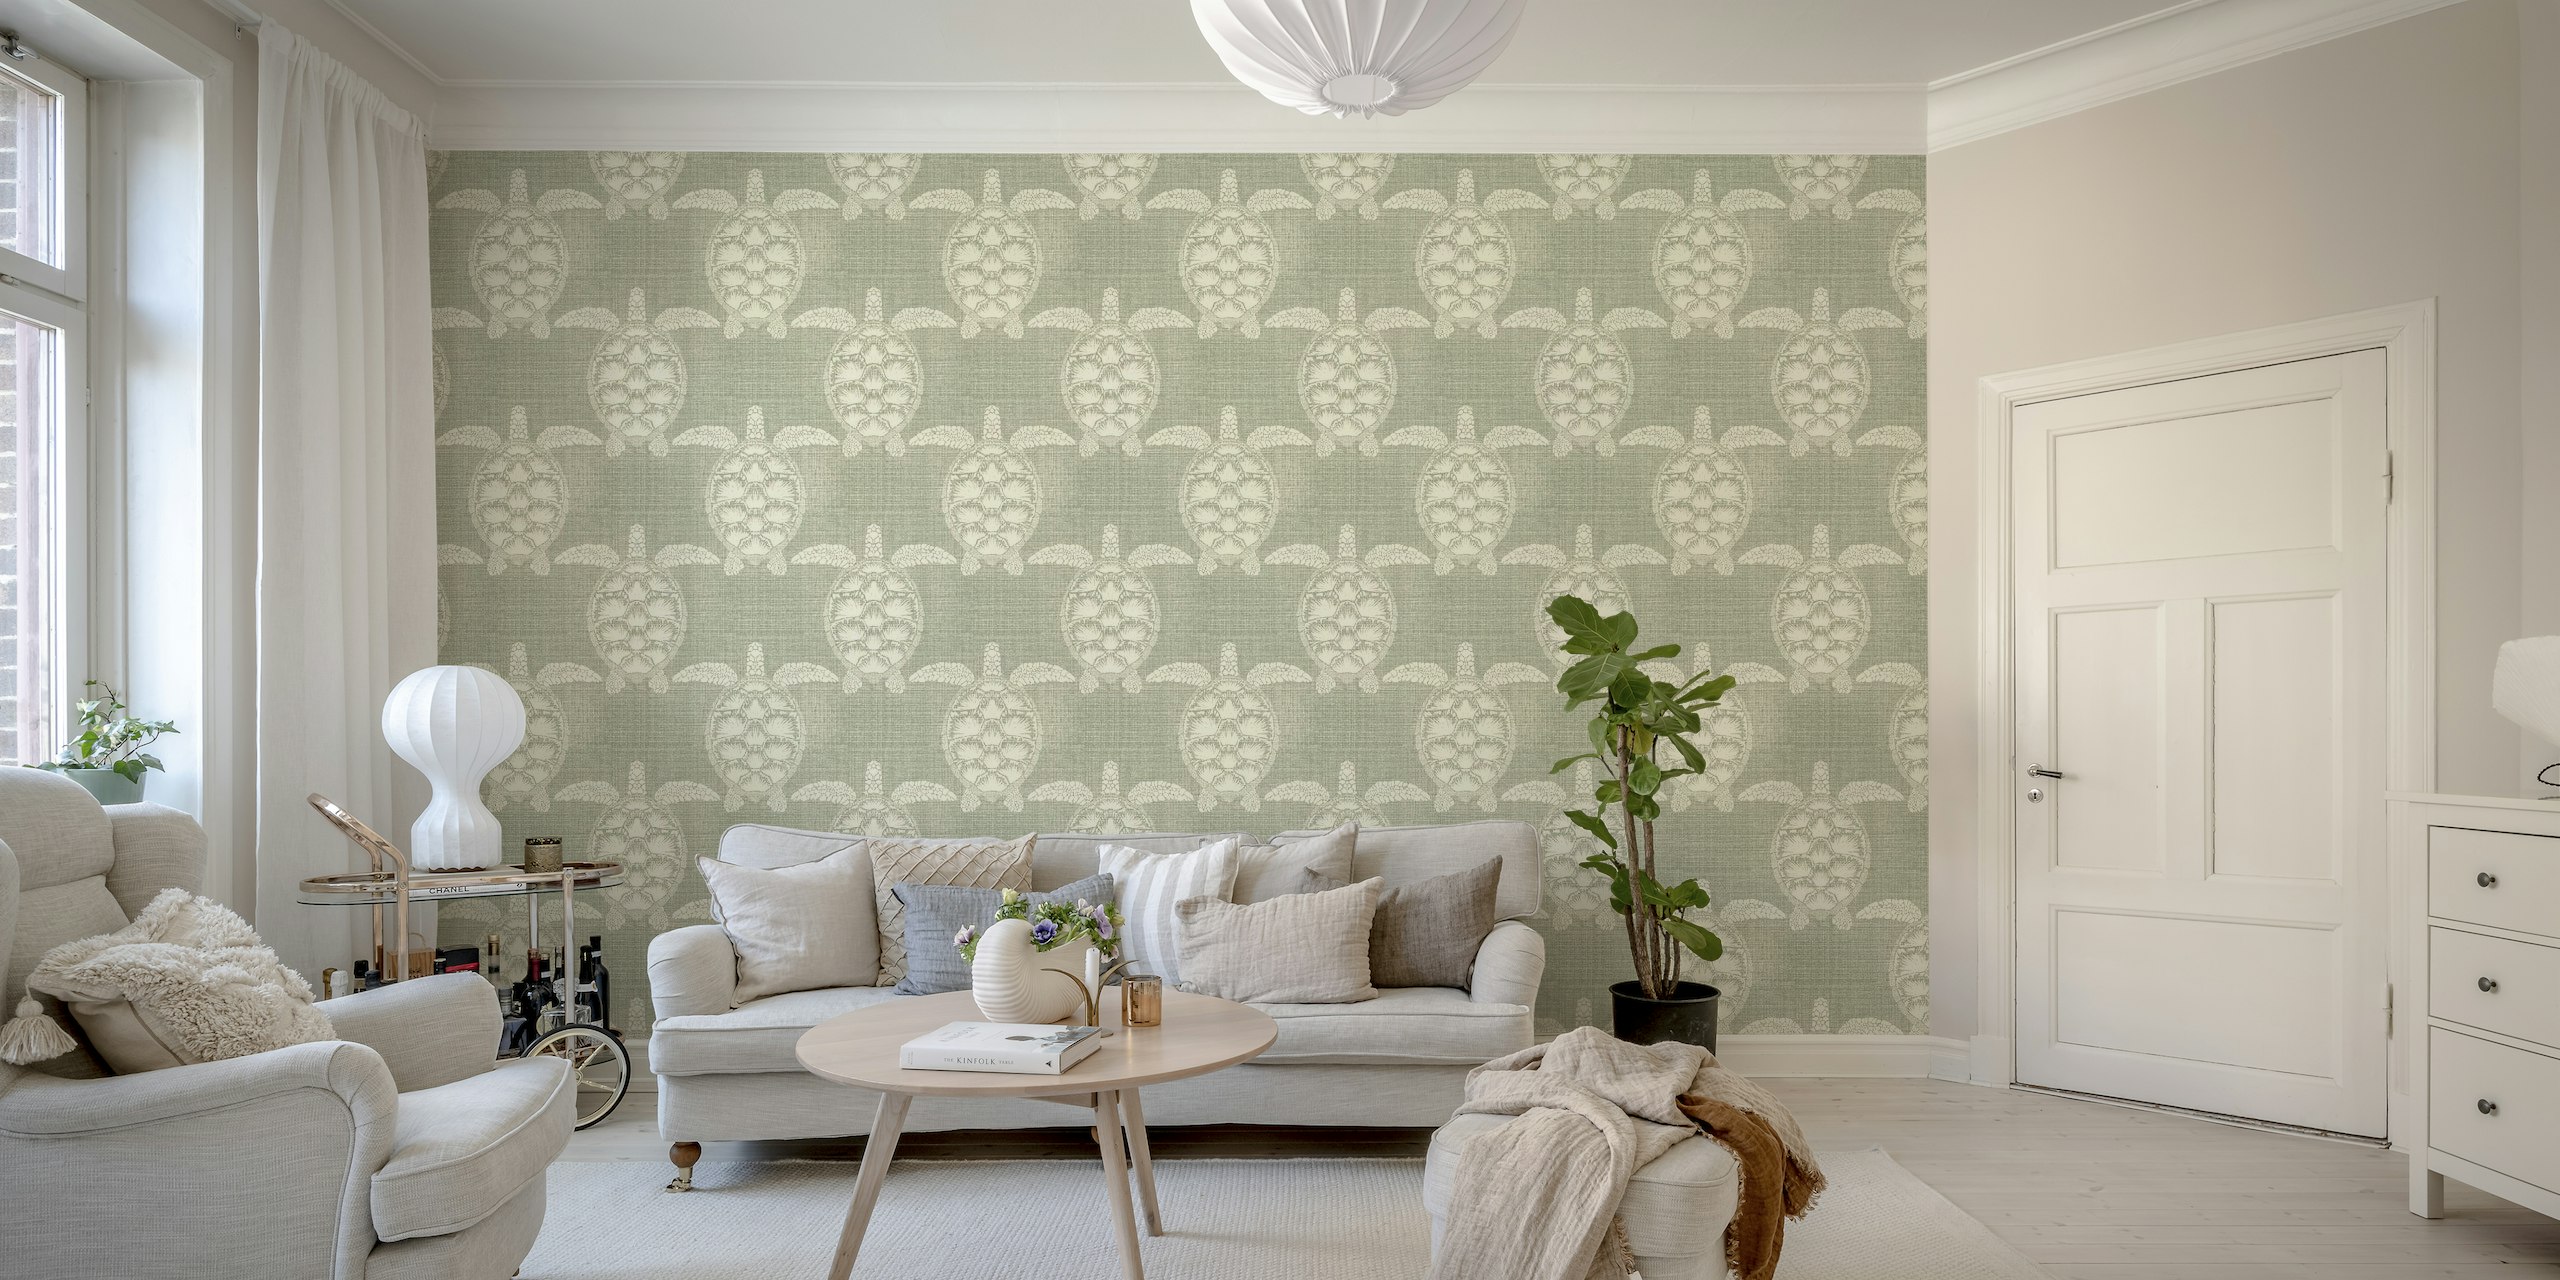 Sea Turtle wall mural pattern with calming hues